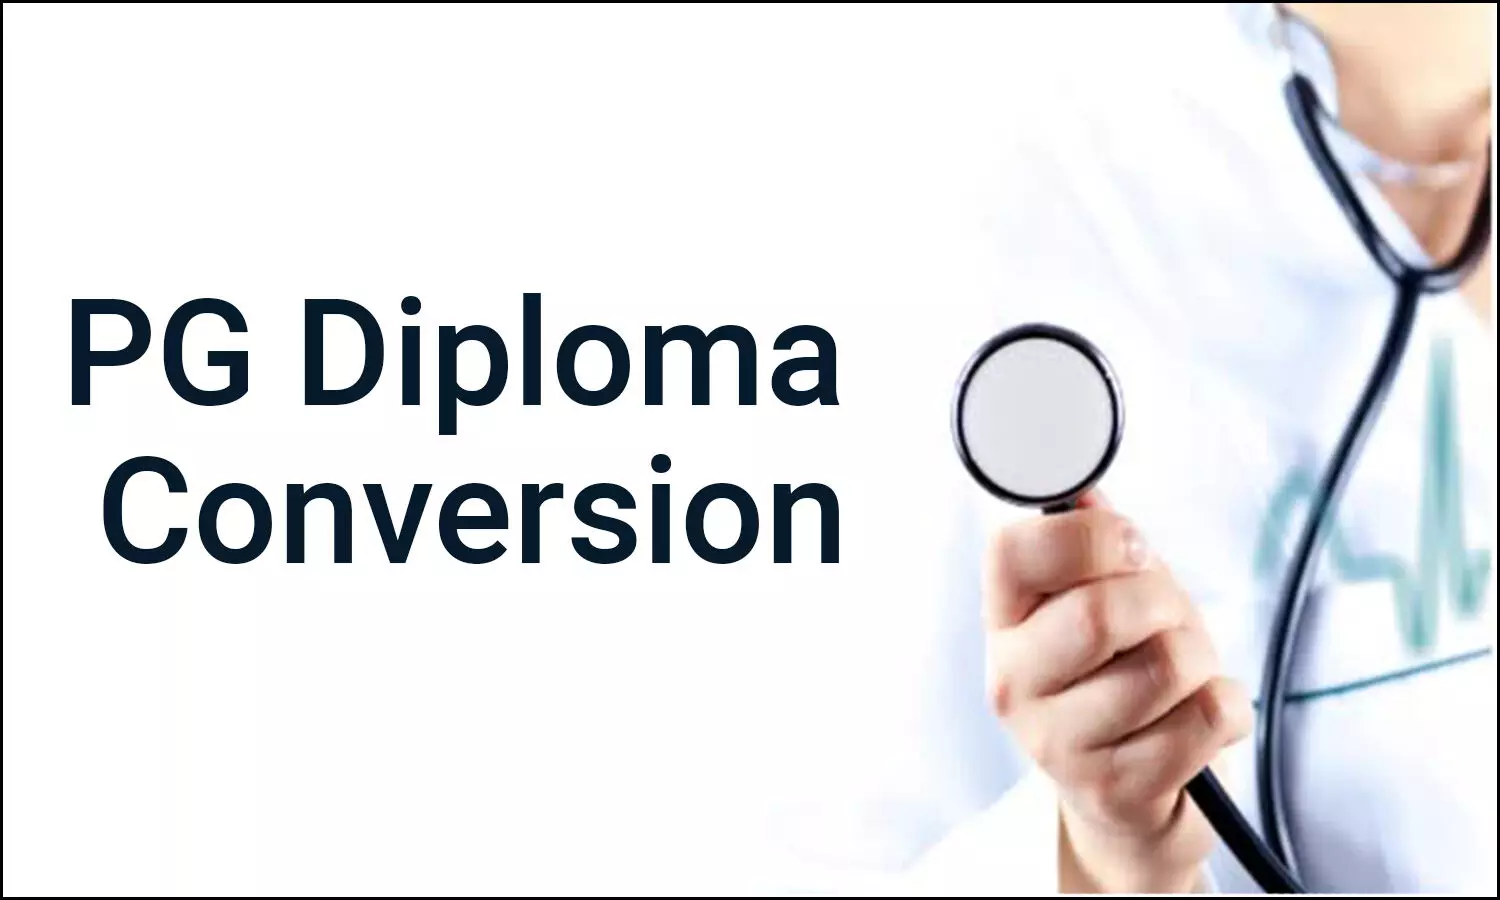 MCI converts 689 PG Diploma seats into MD,MS Degree seats, details